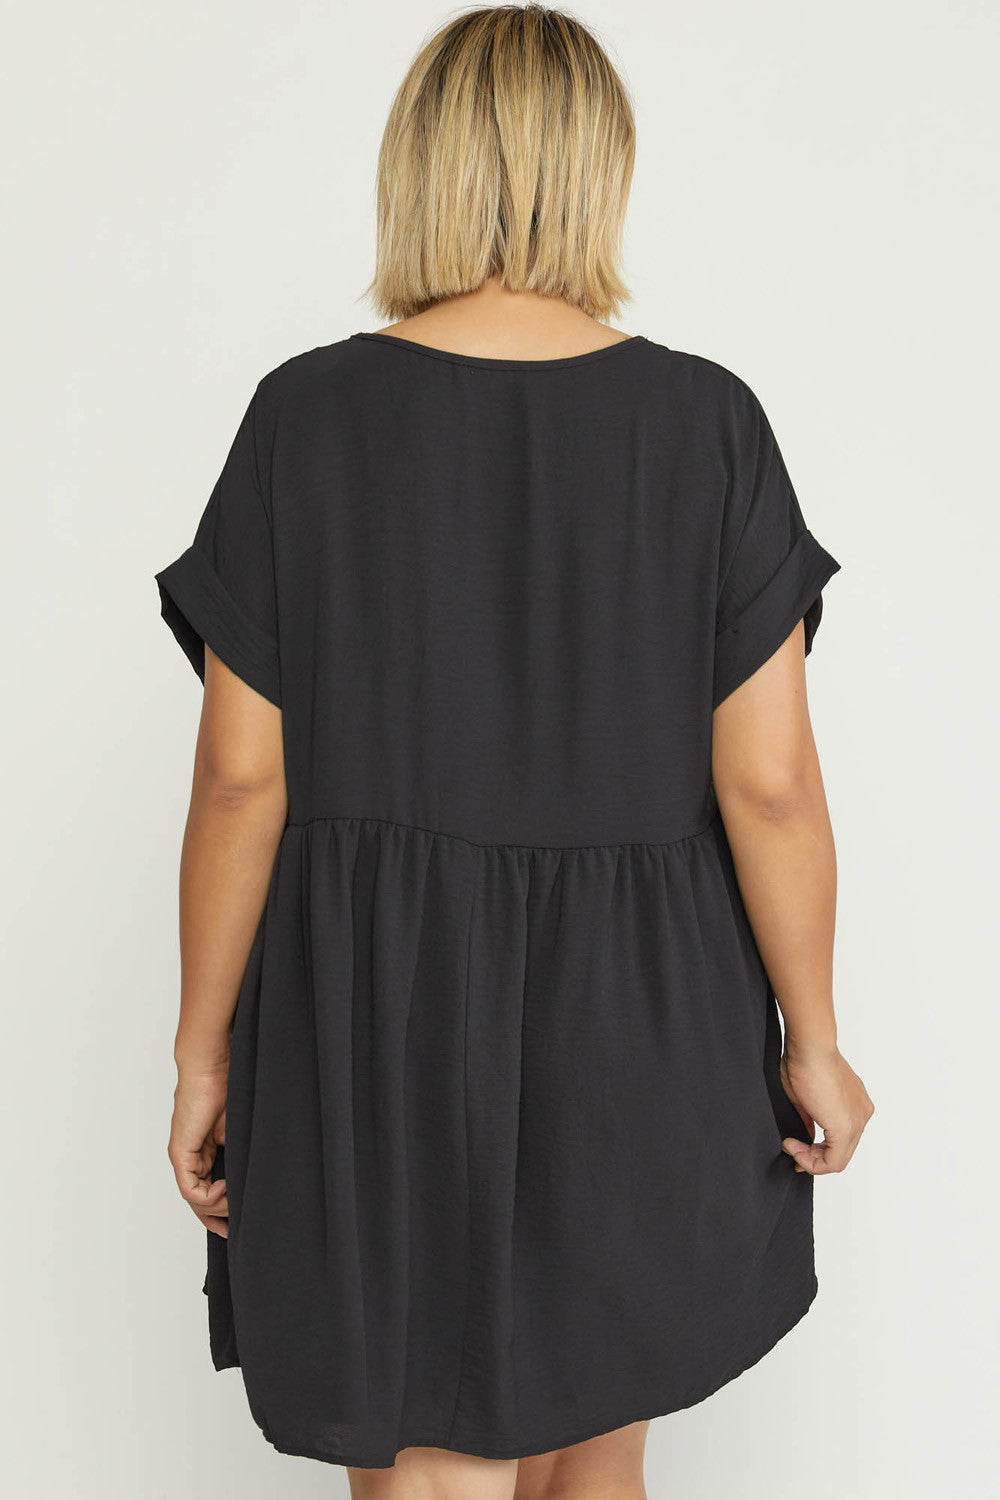 Solid Rolled Sleeve Basic Babydoll Dress in Plus Size by Entro Clothing